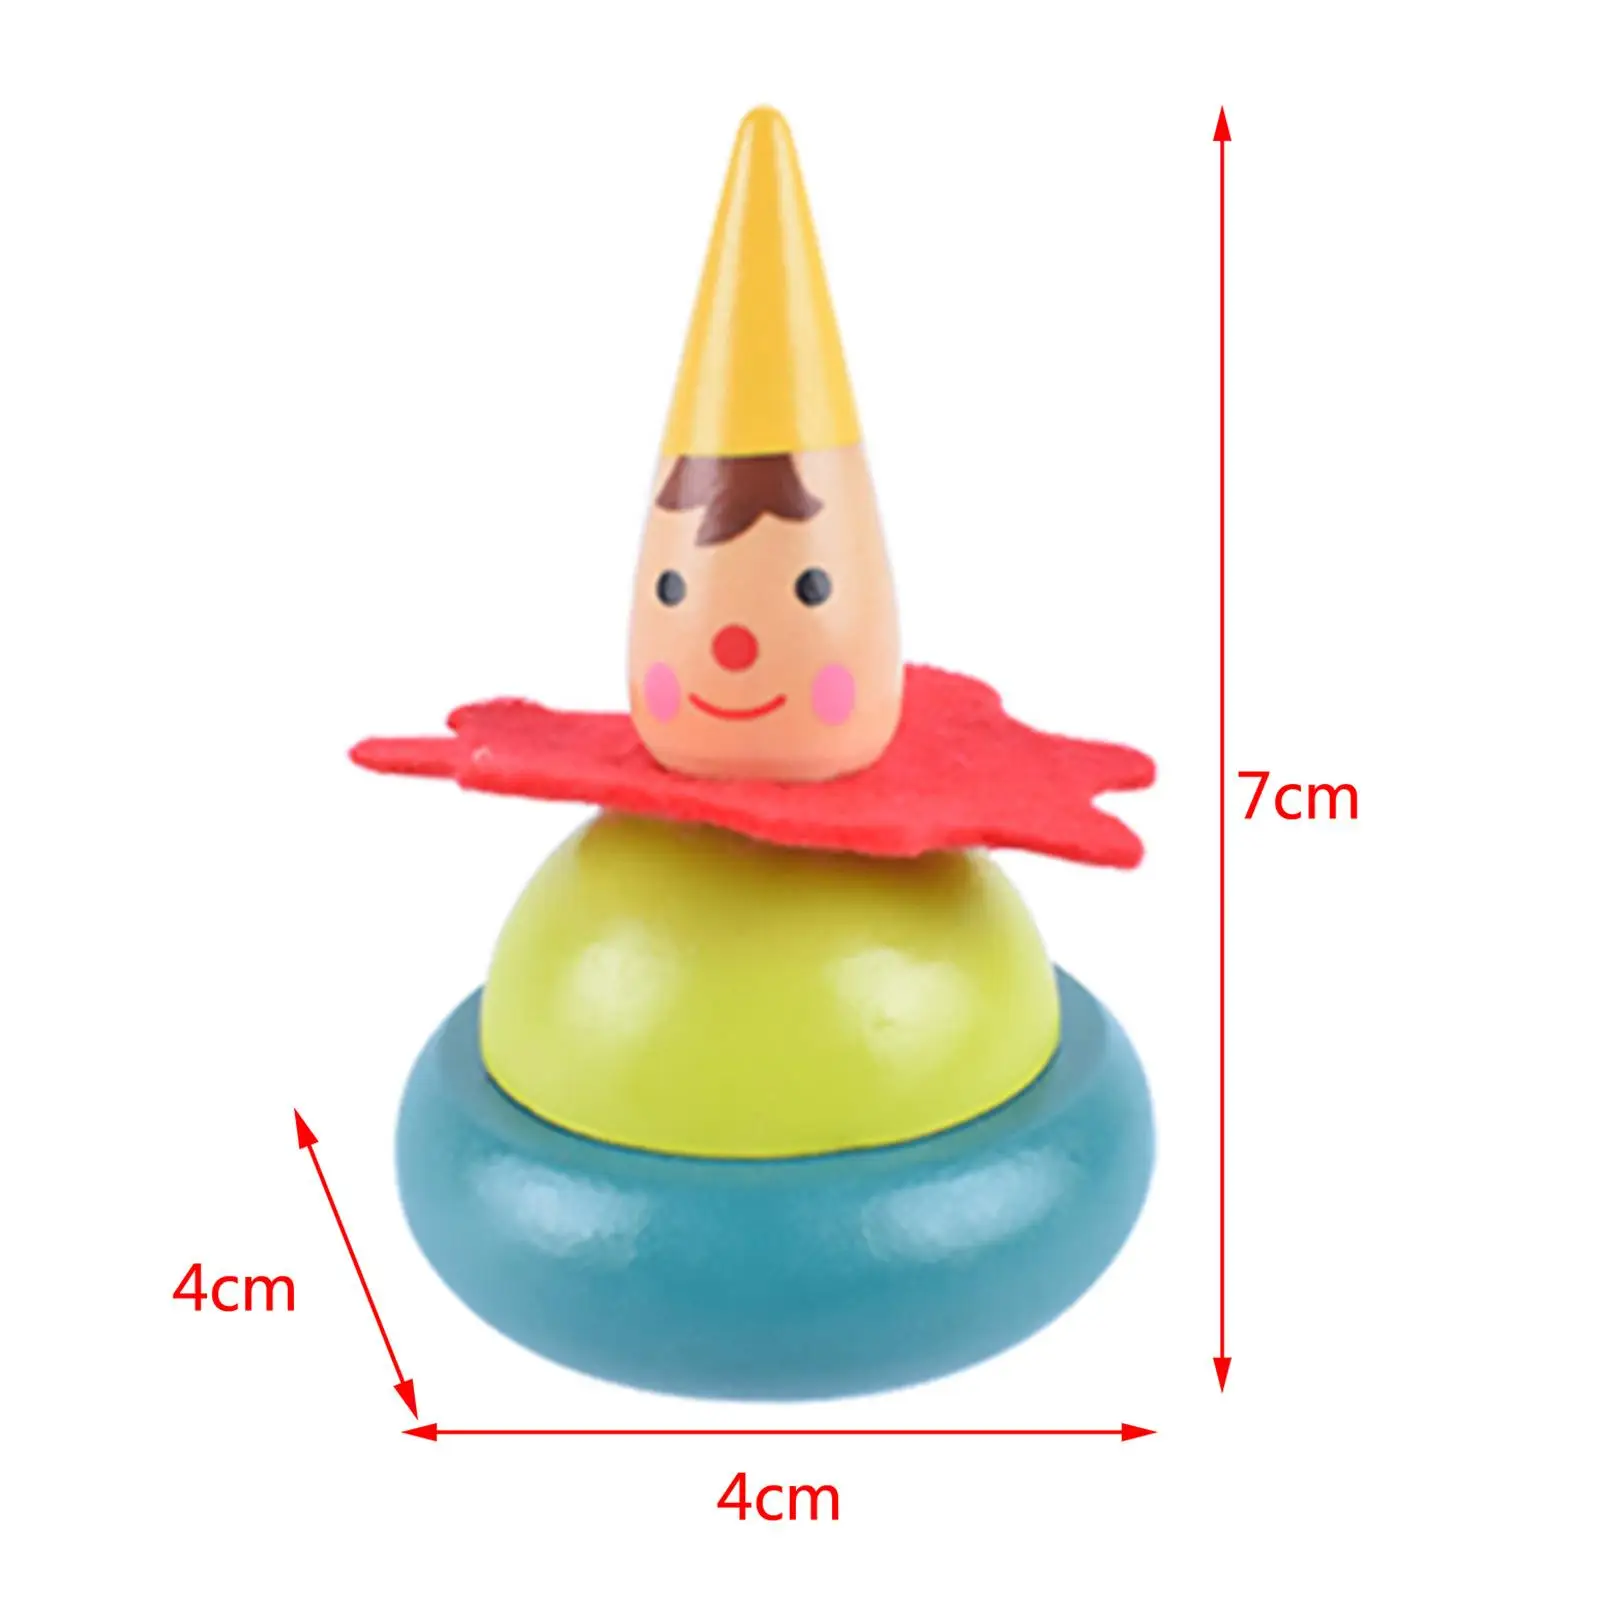 Classic Wooden Whirling Toy Learning Toys Brain Development for Toddler